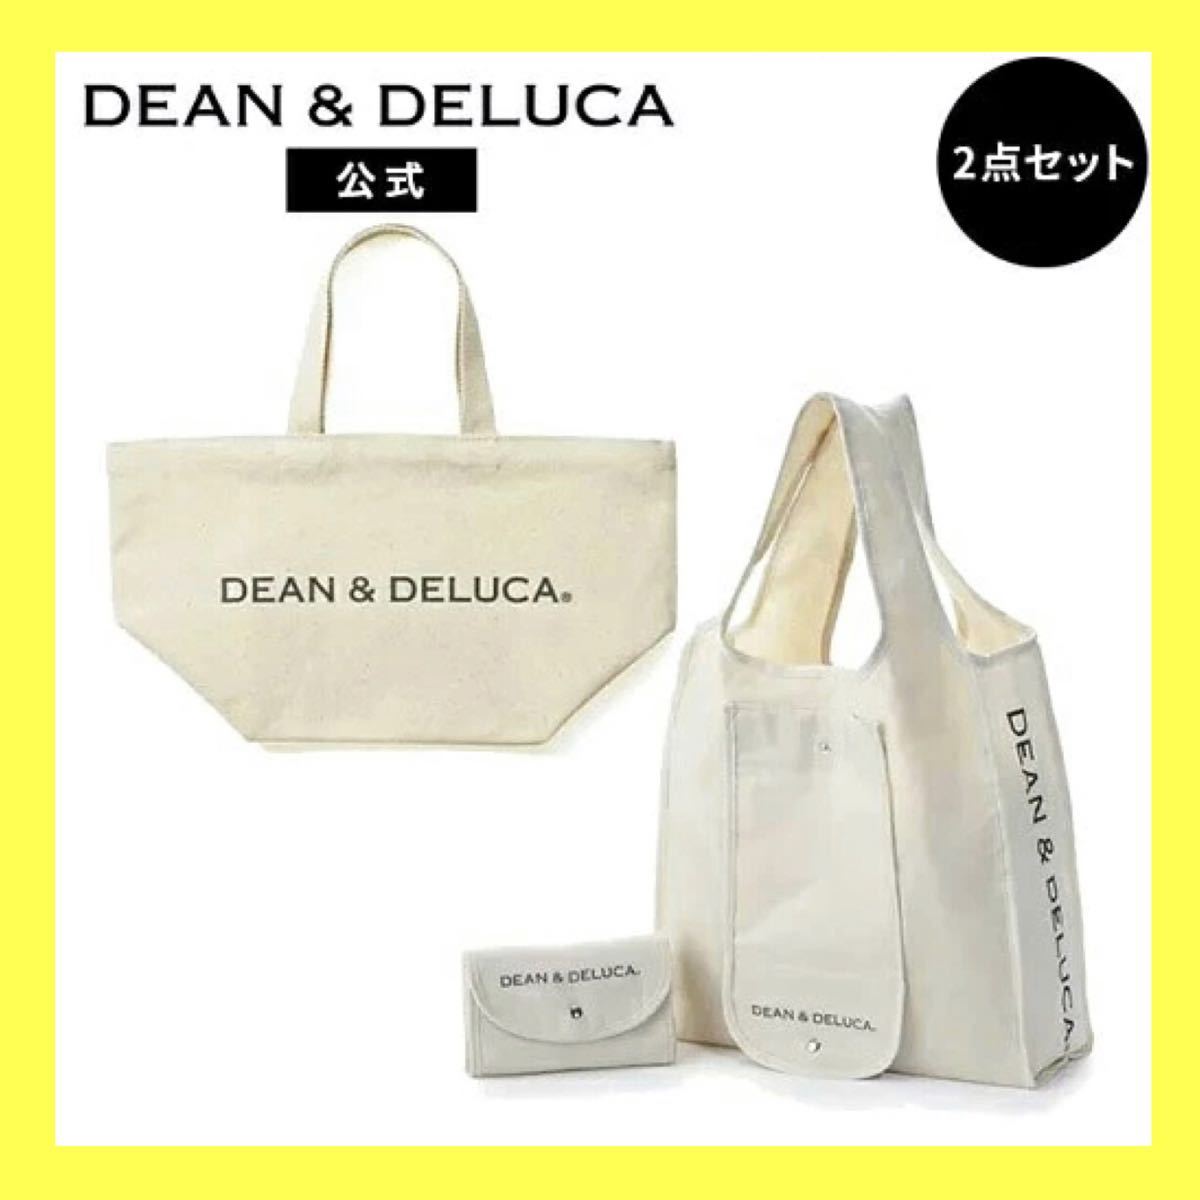 DEAN&DELUCA ディーン&デルーカ バッグ 2点セット  トートバッグ